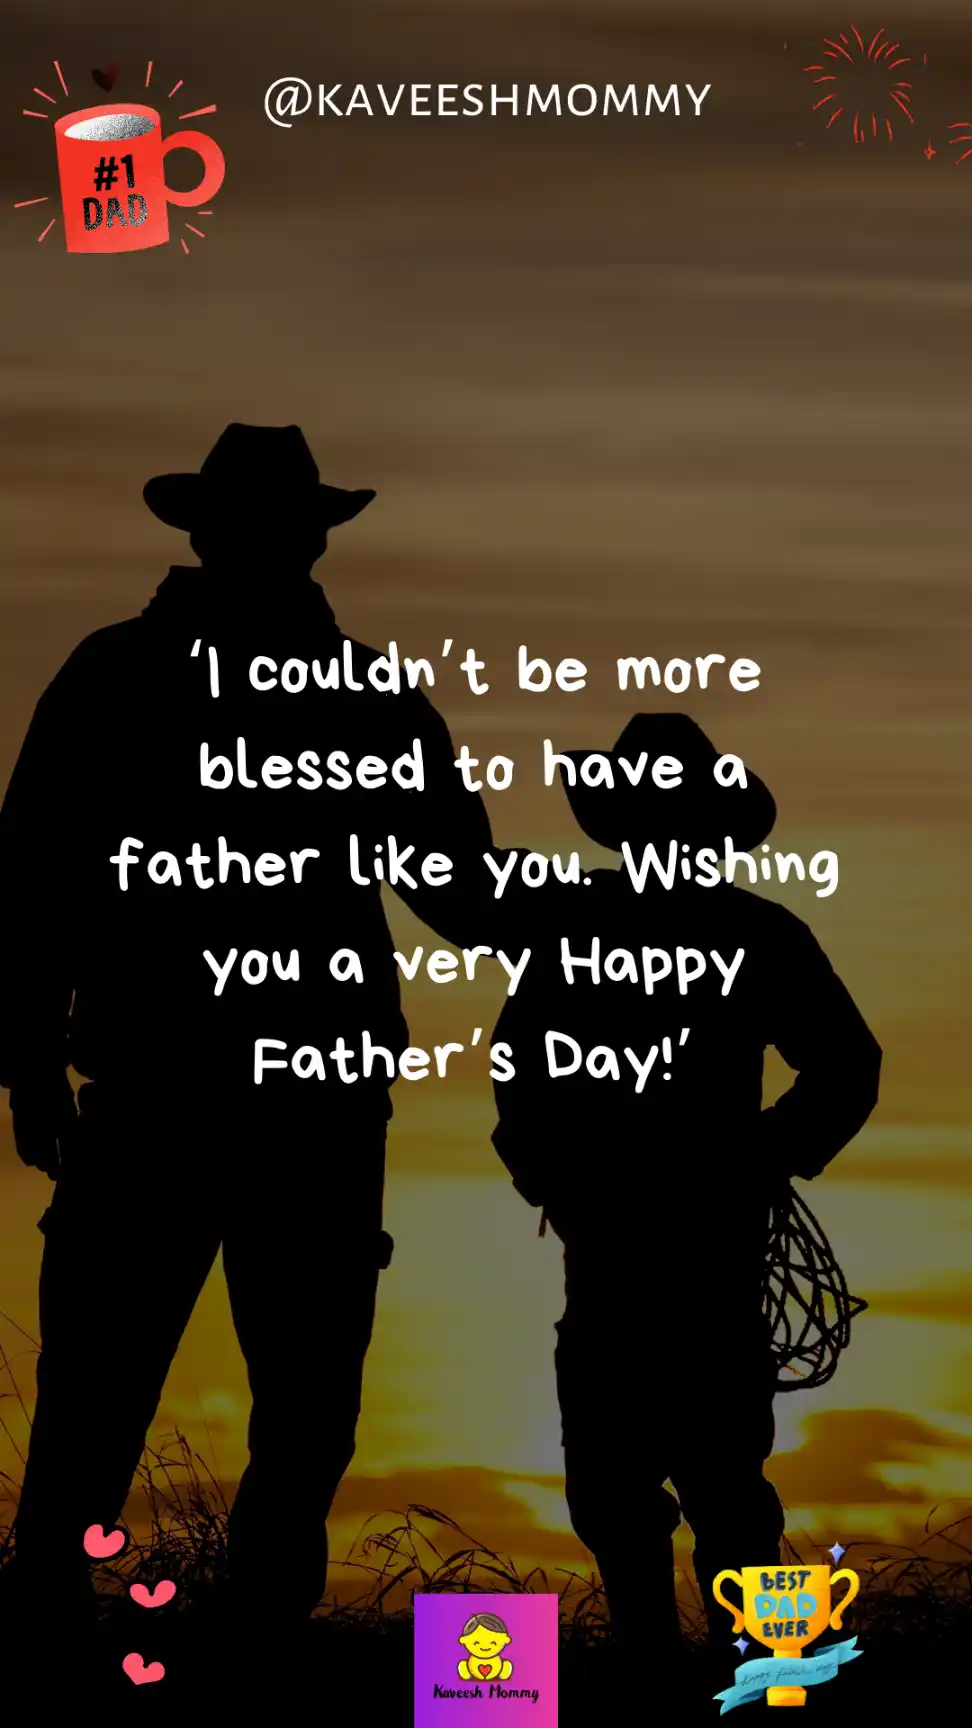 fathers day message for dad from son-‘I couldn’t be more blessed to have a father like you. Wishing you a very Happy Father’s Day!’